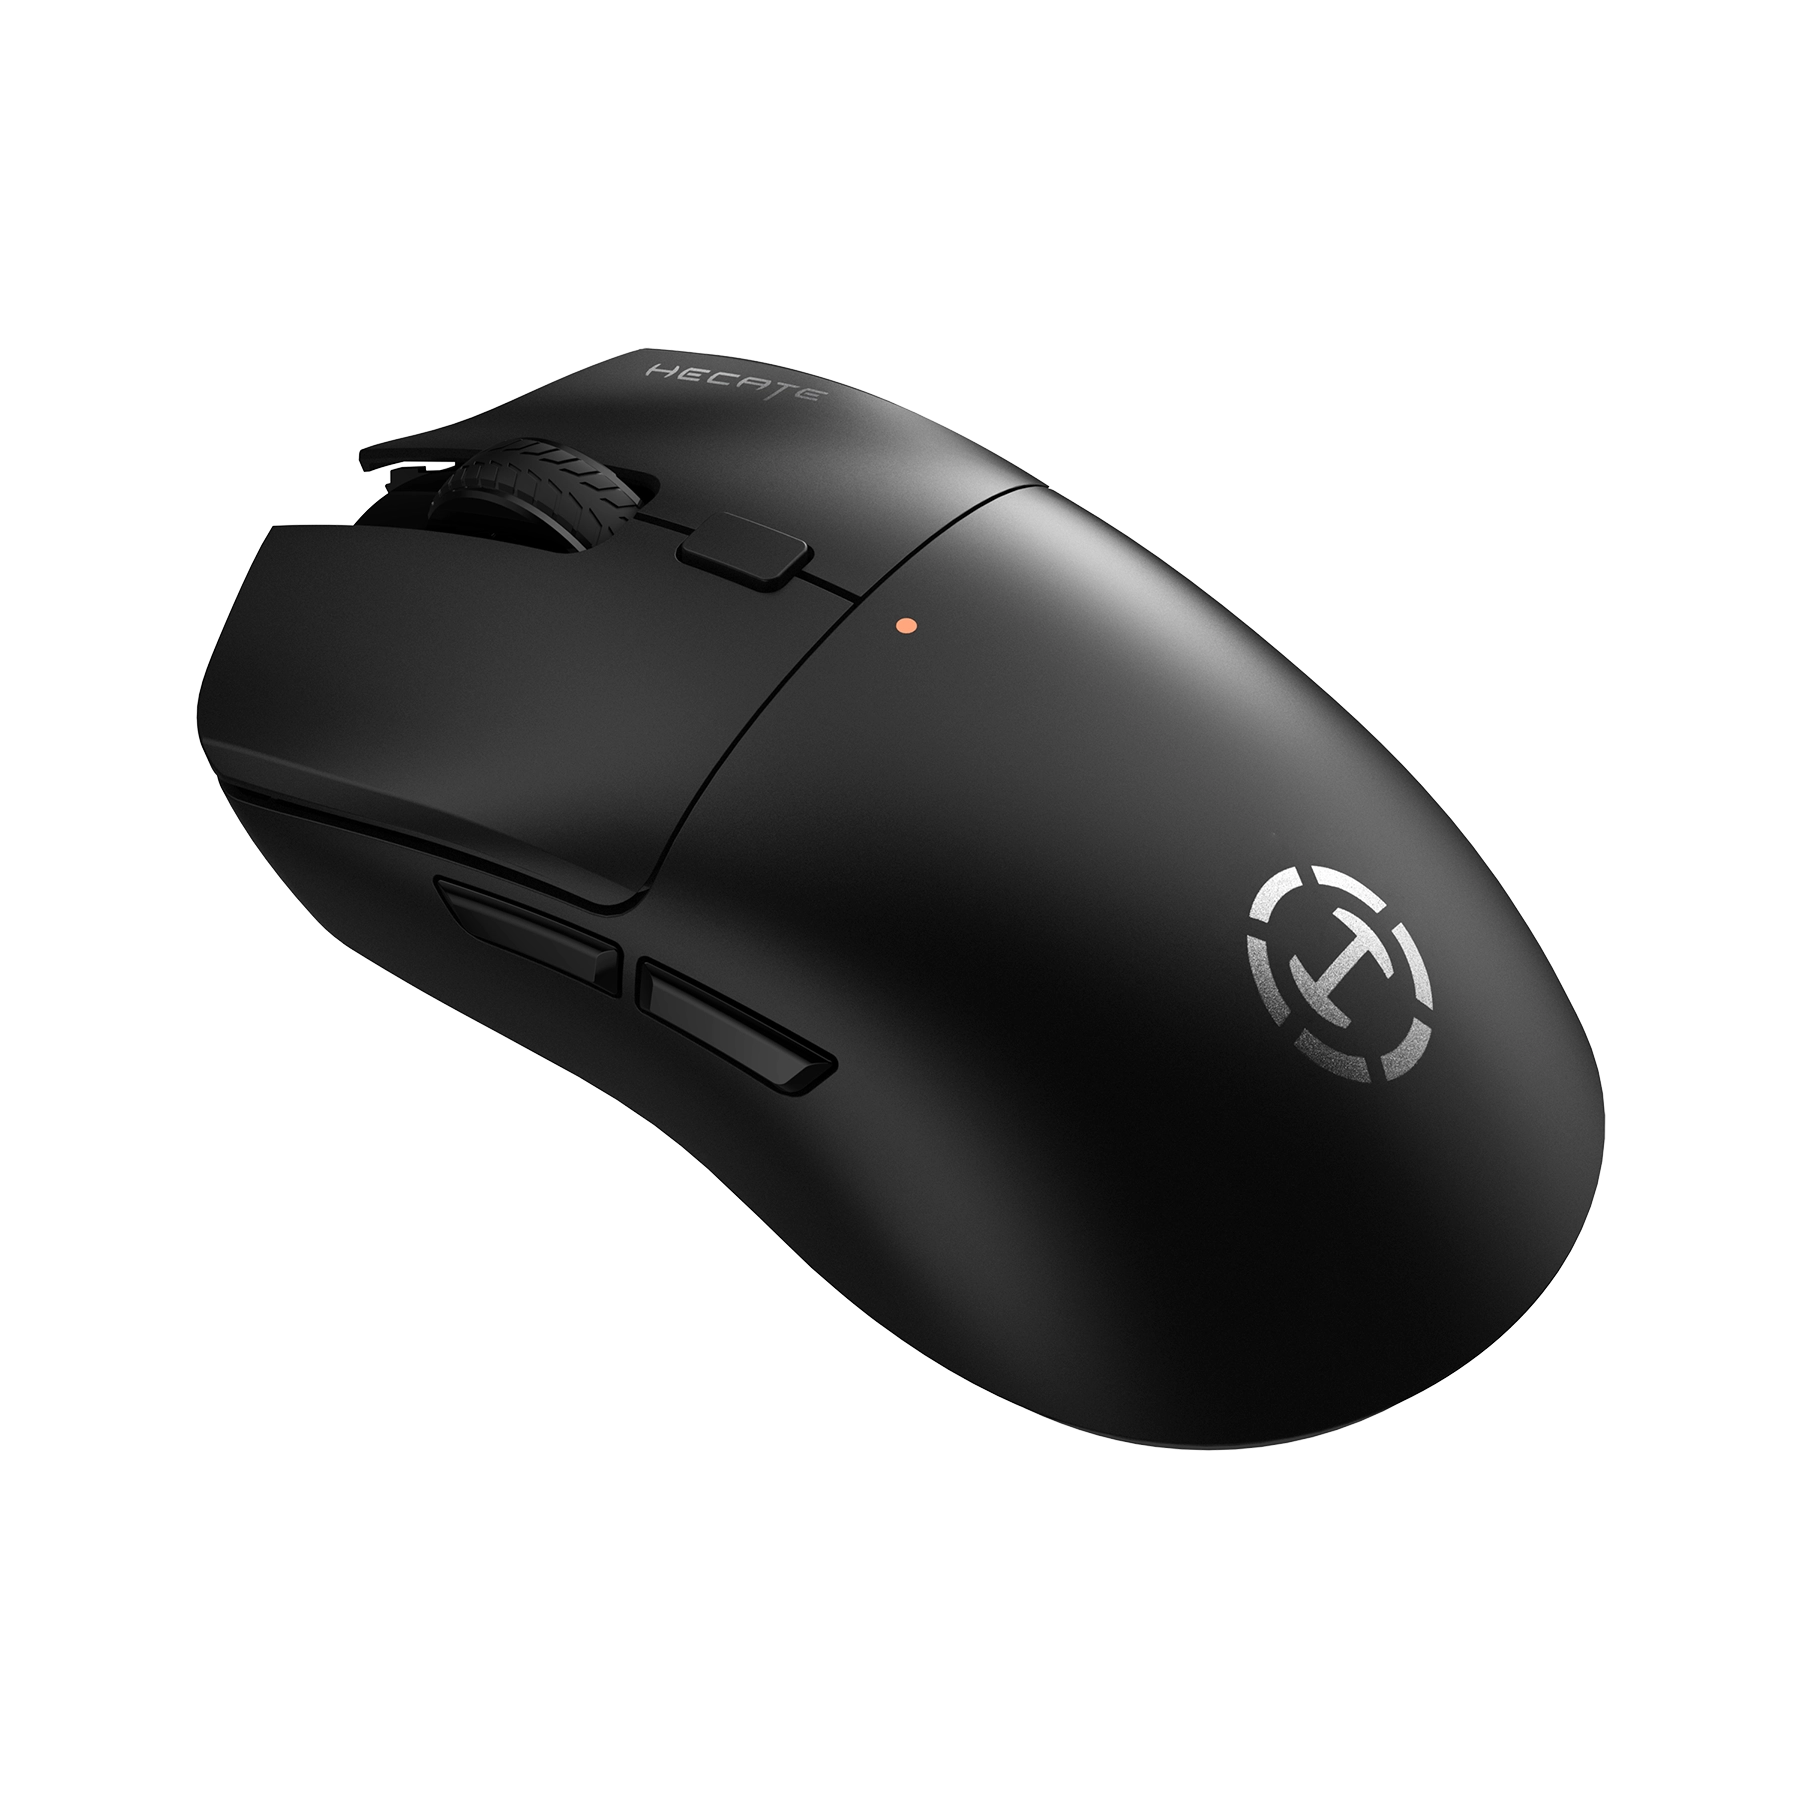 Can a gaming mouse be silenced for office use?